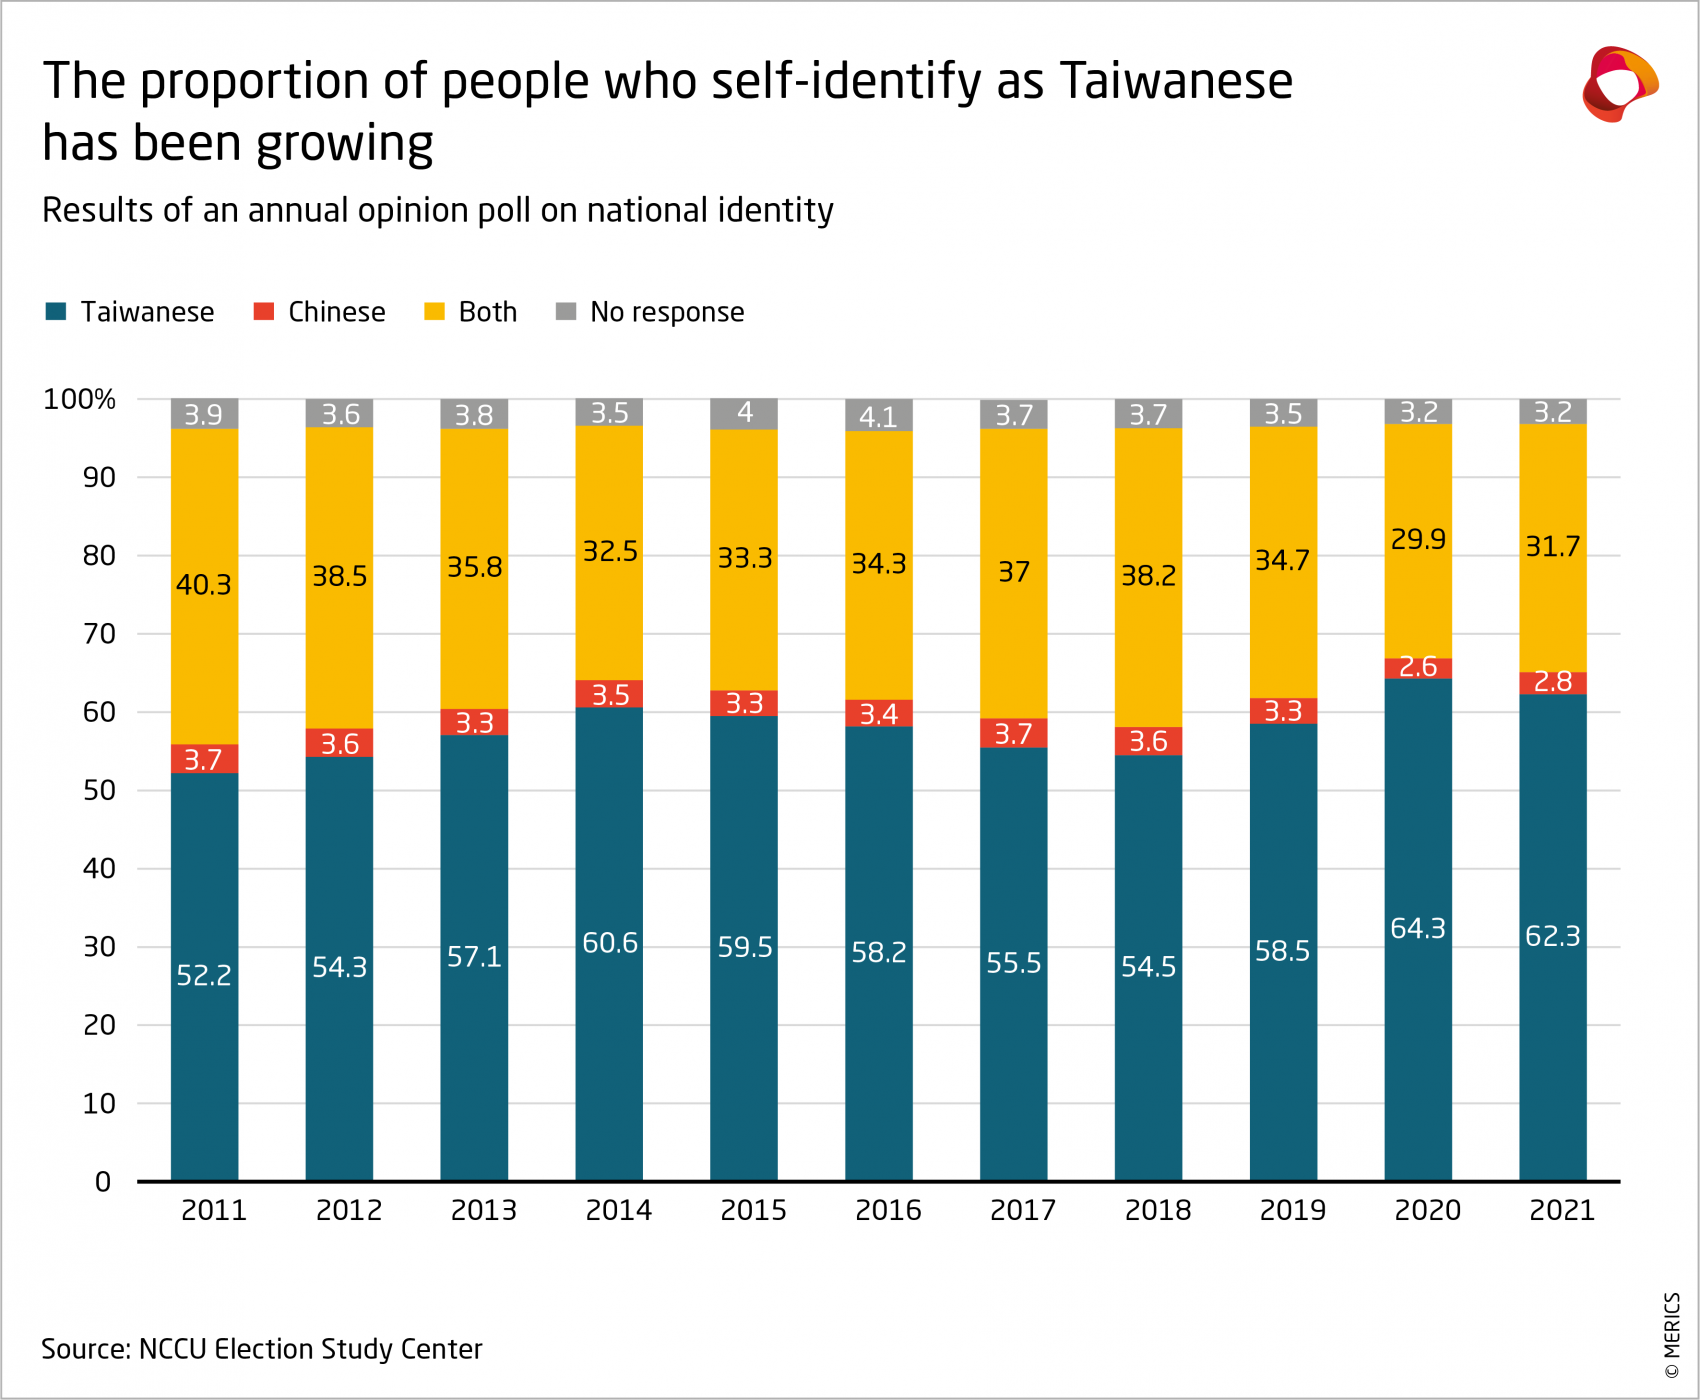 Proportion of people self-identifying as Taiwanese has been growing